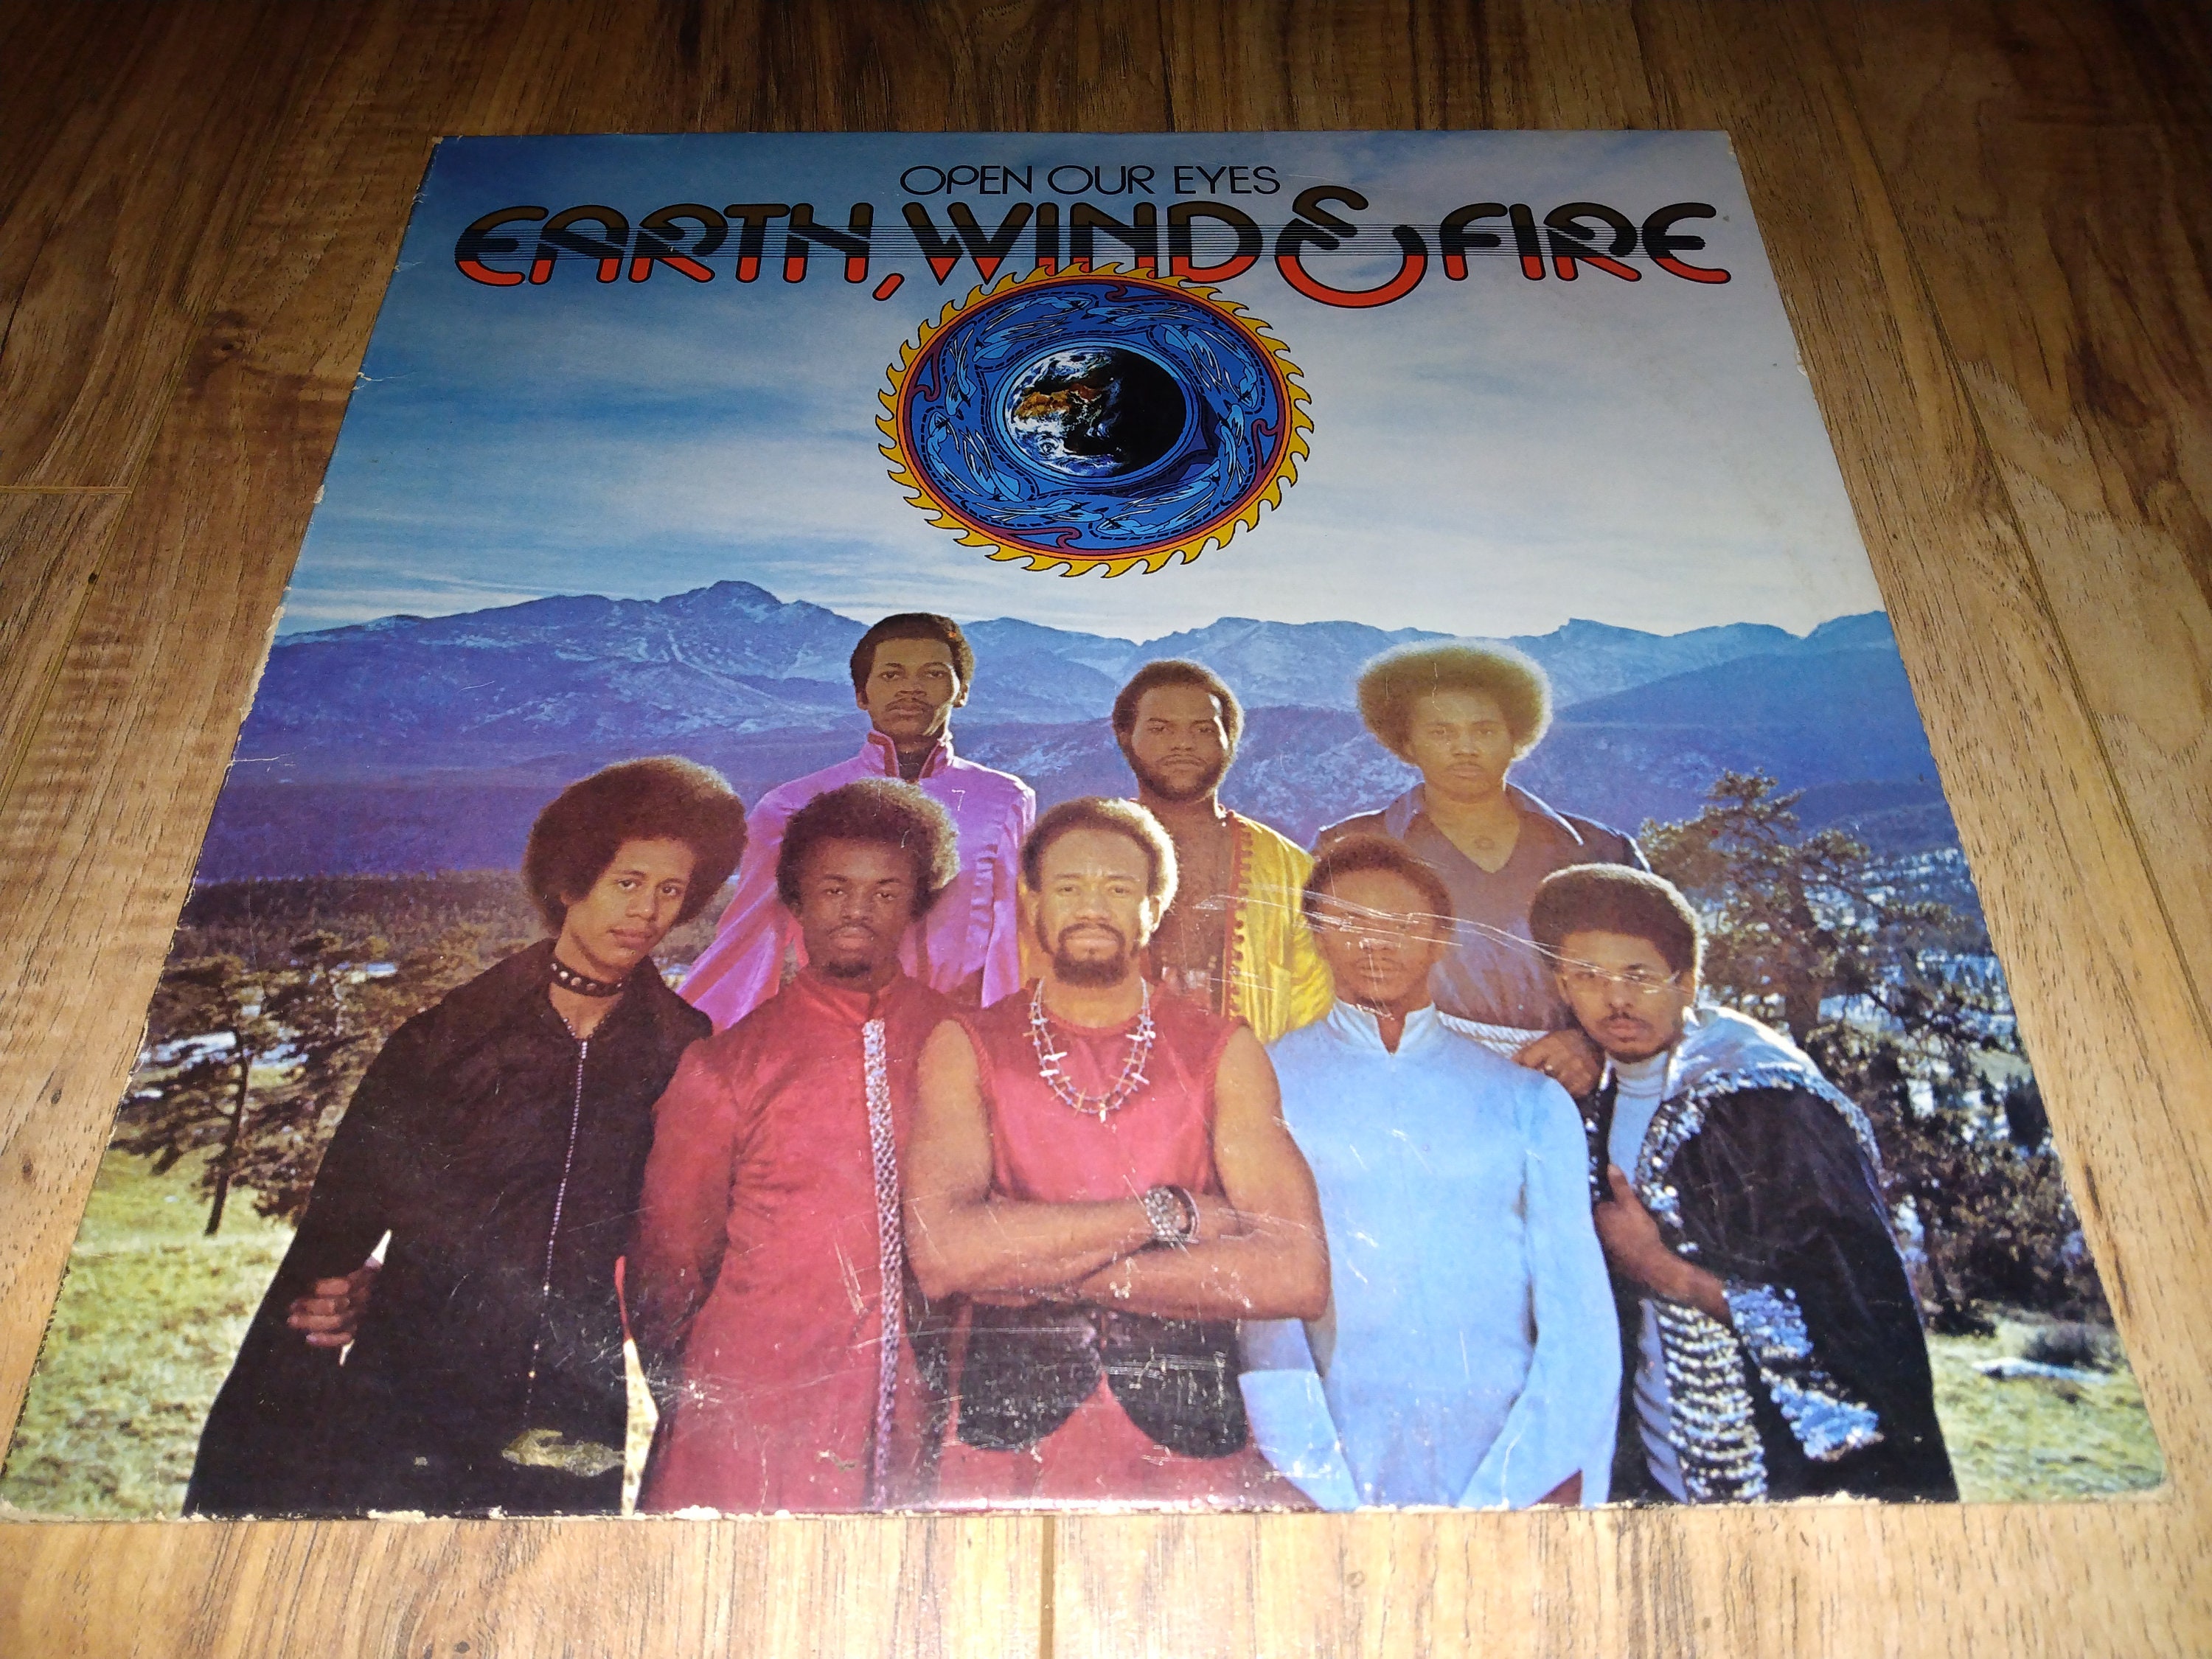 Open Our Eyes - Album by Earth, Wind & Fire